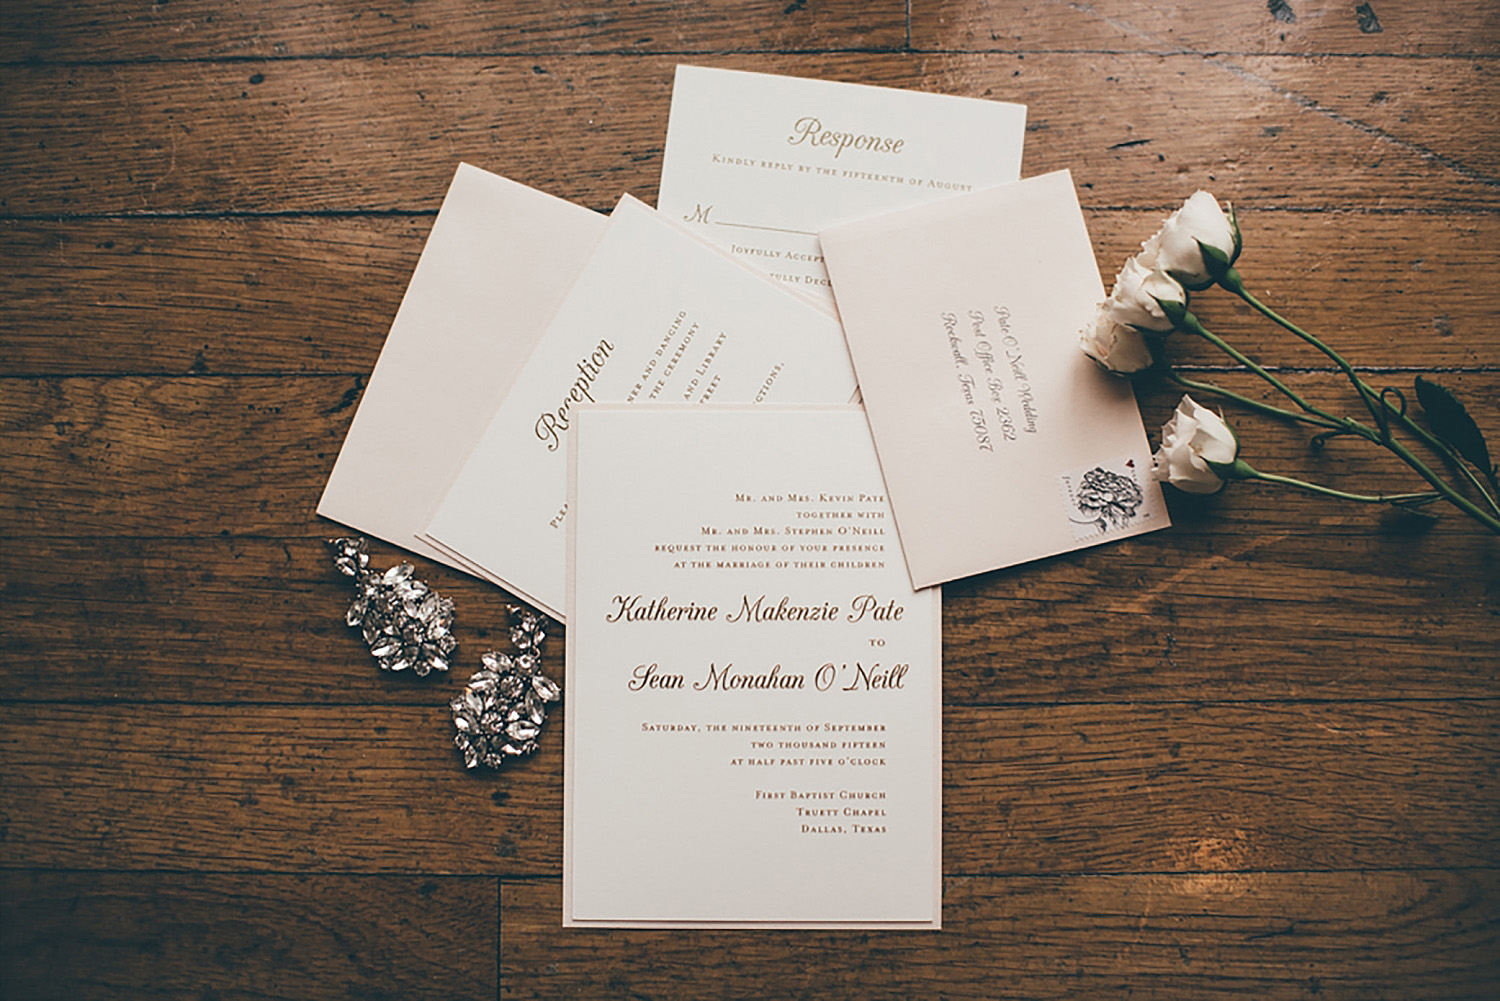 Dallas Scottish Rite Library and Museum wedding invitations with gold writing and white flowers on wood floor